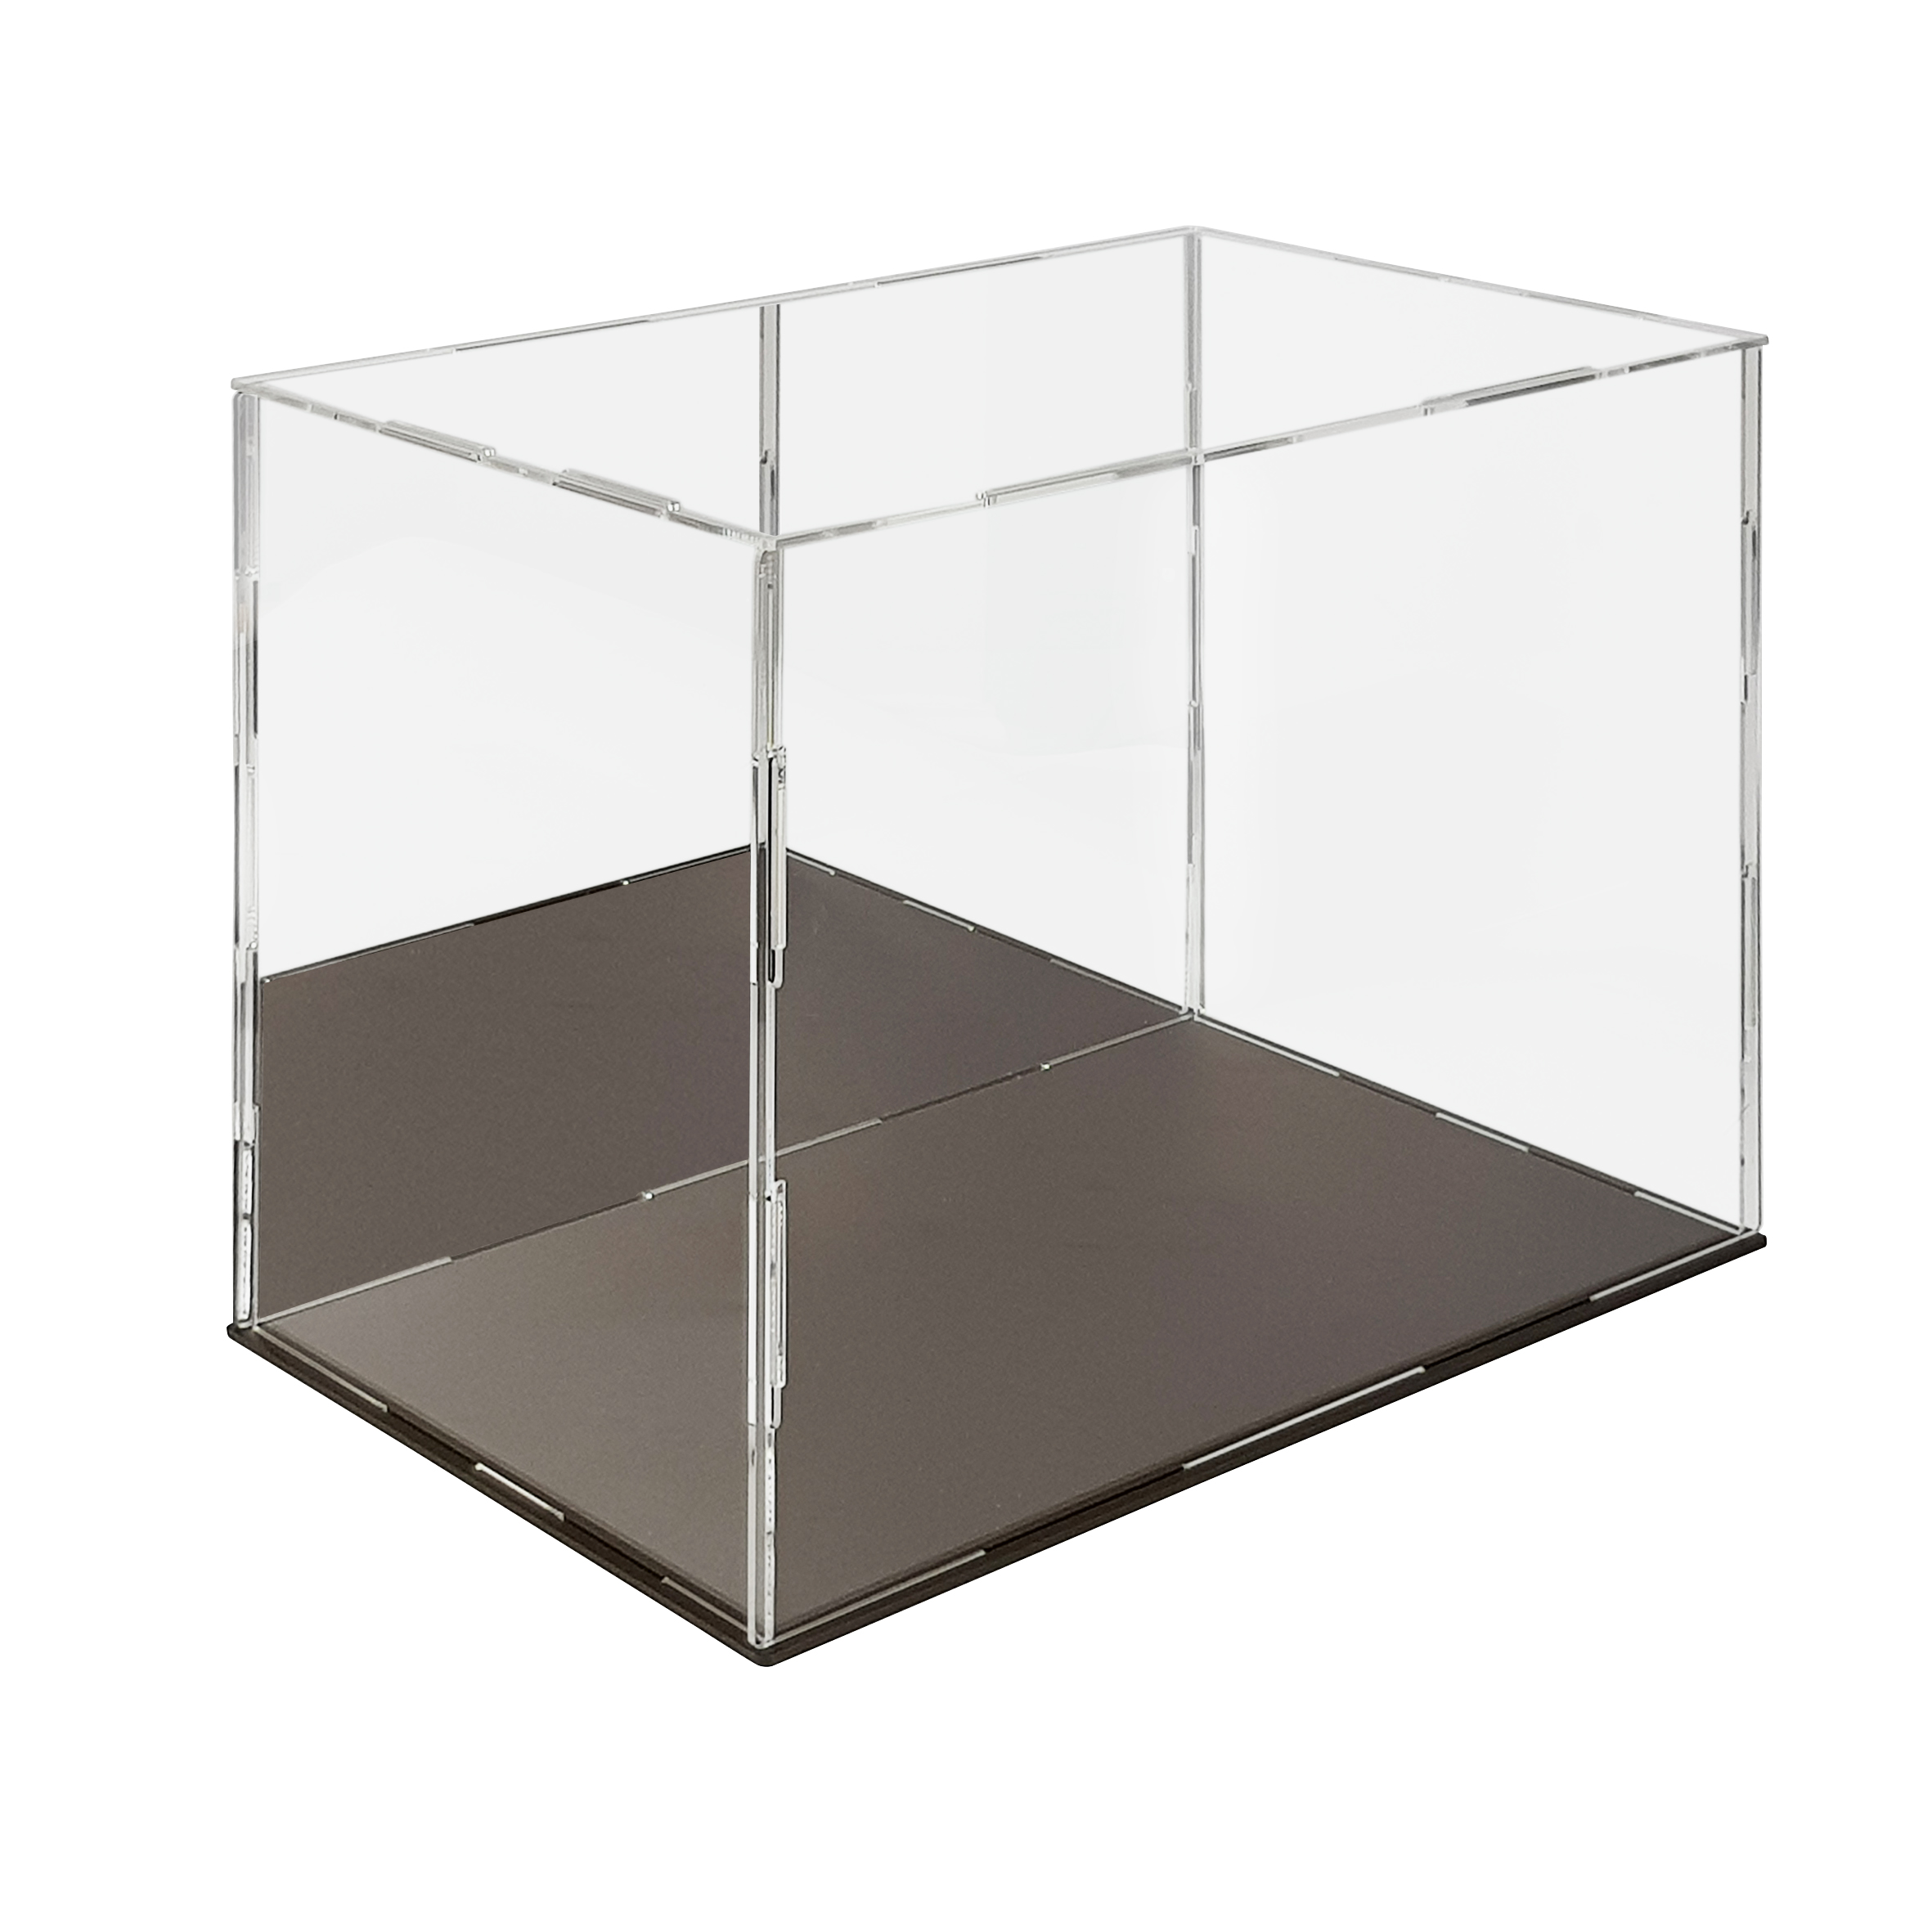 Display Cases With Mirrored Rear Panel